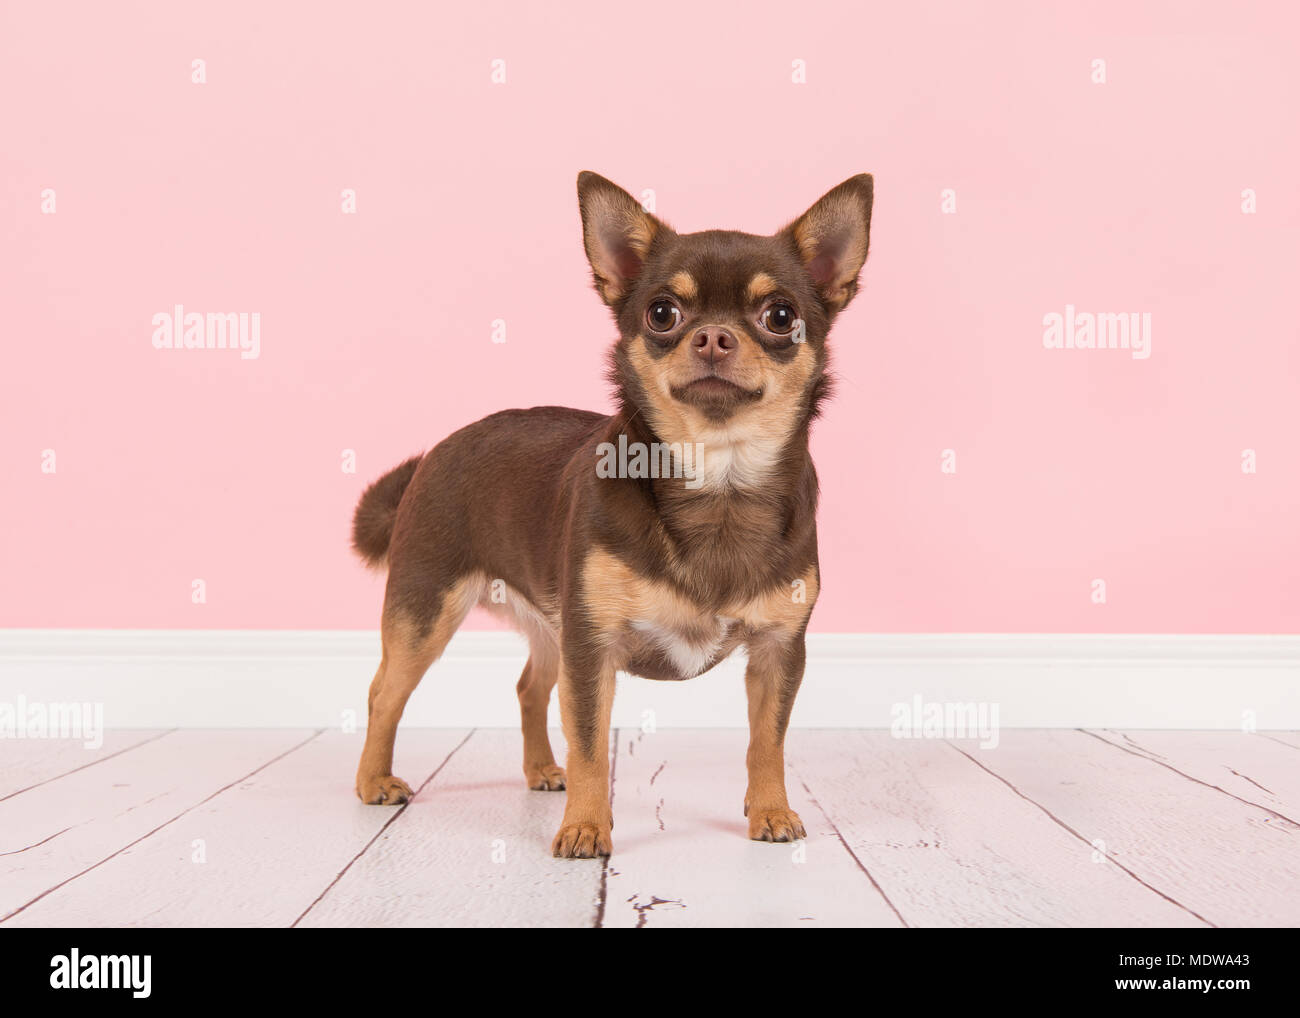 Cute brown chihuahua dog standing seen from the side in a pink living room setting Stock Photo